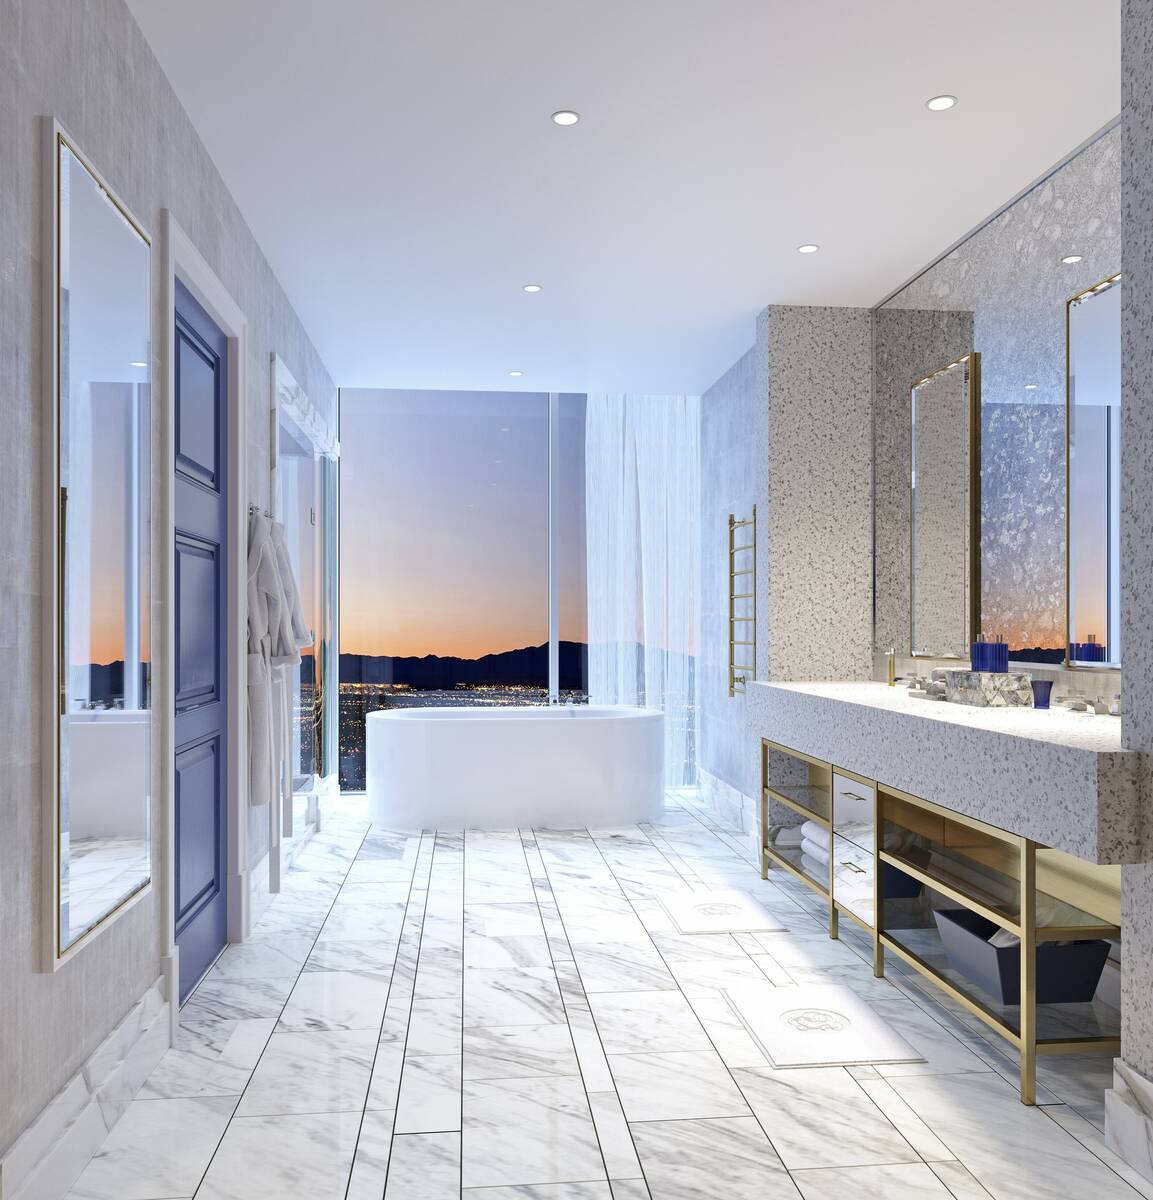 An artist's rendering of the Monarque suite bedroom at Fontainebleau Las Vegas. (Fontainebleau ...